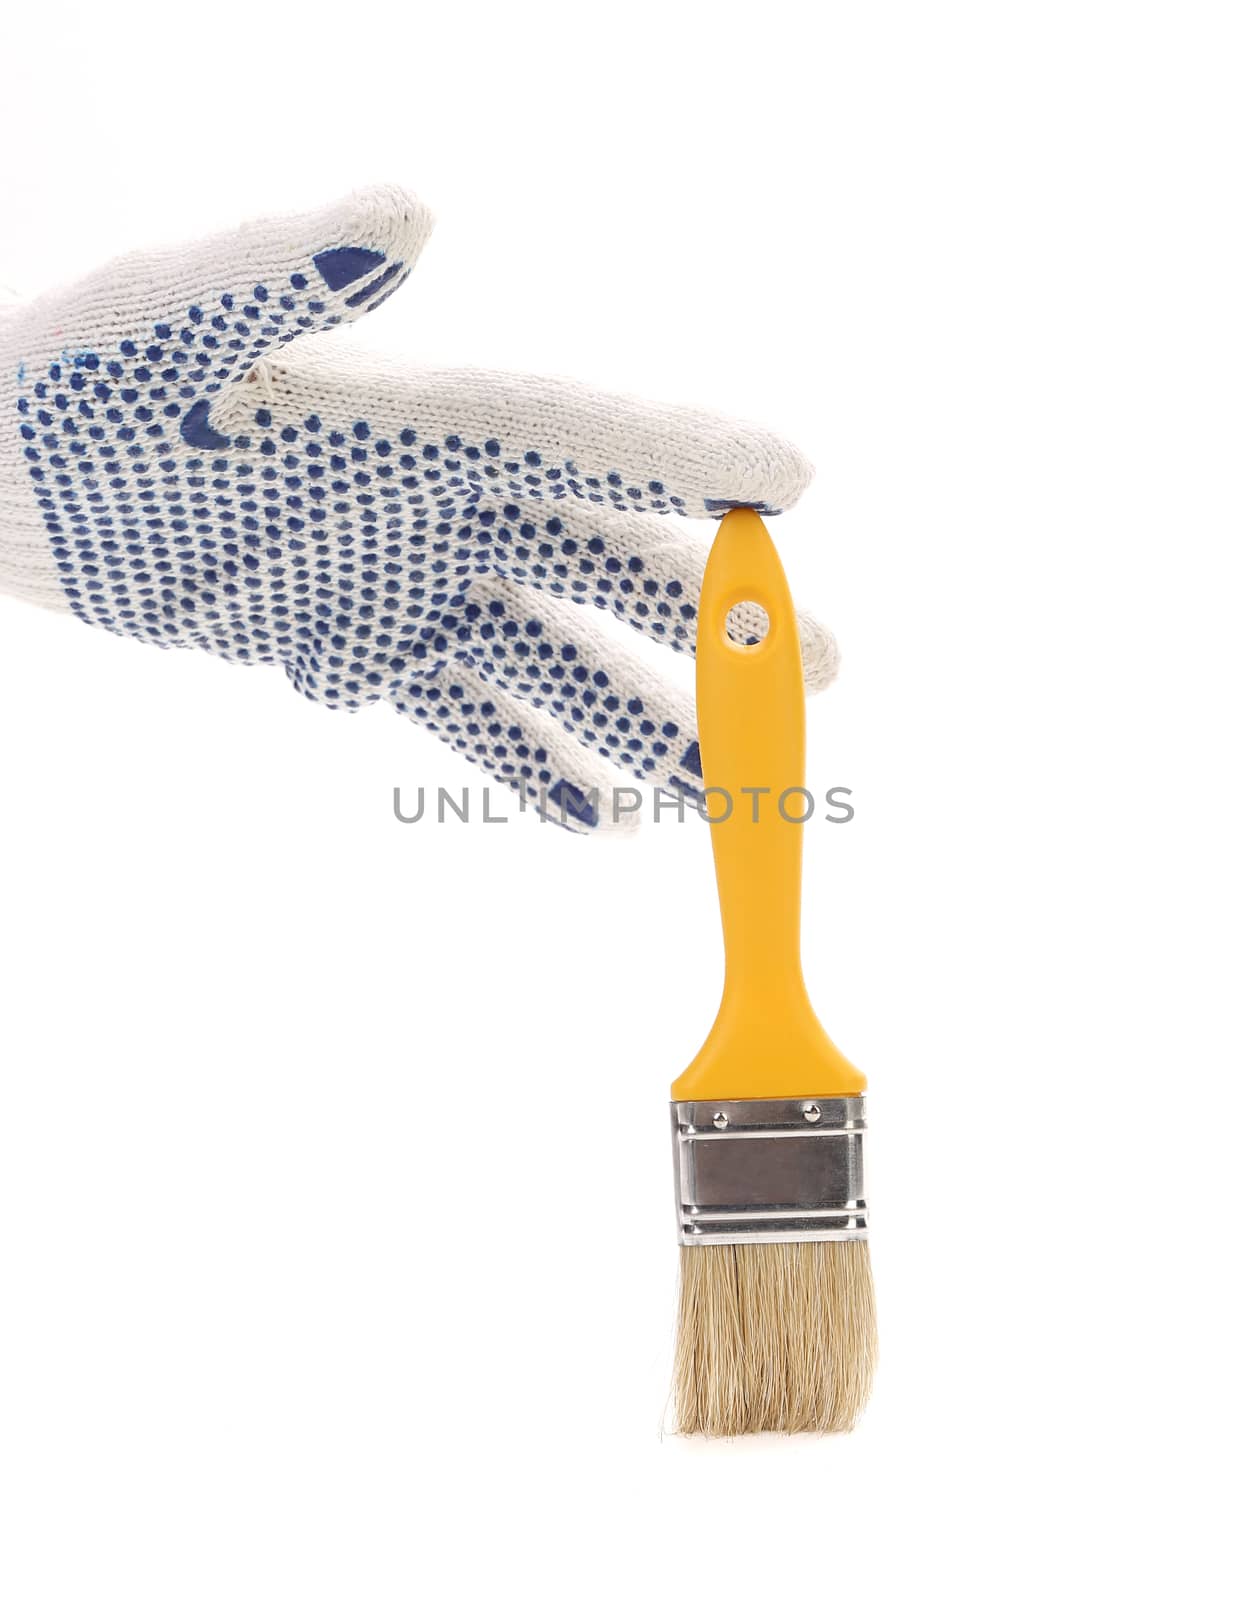 Hand in gloves holds brush. by indigolotos